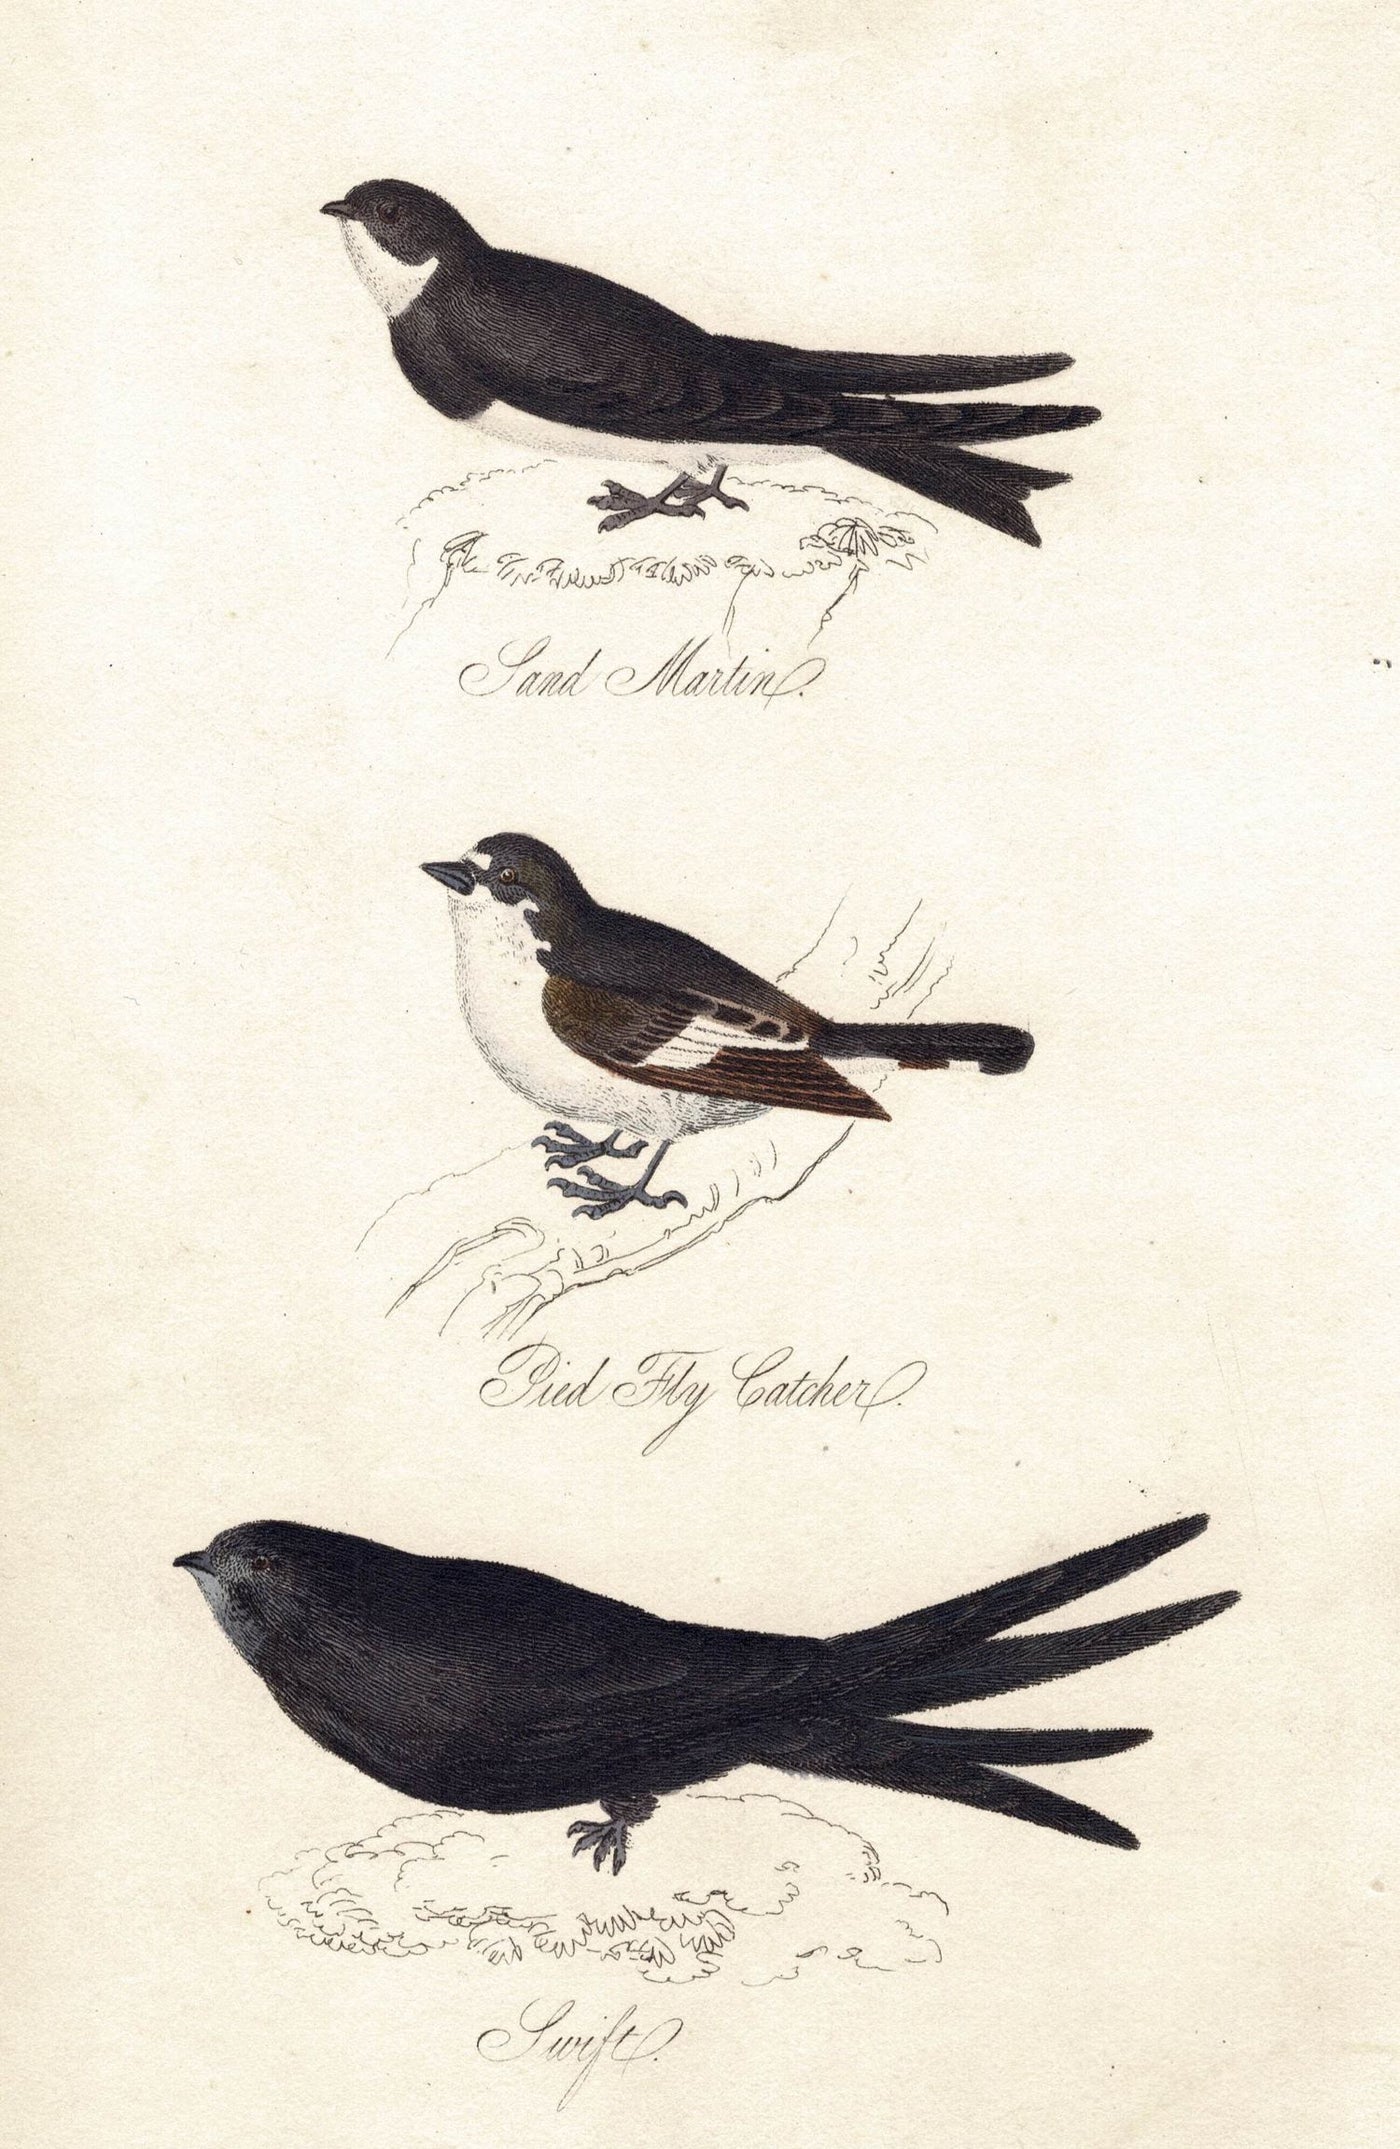 Sand Martin, Pied Fly Catcher, Swift birds antique print published 1834